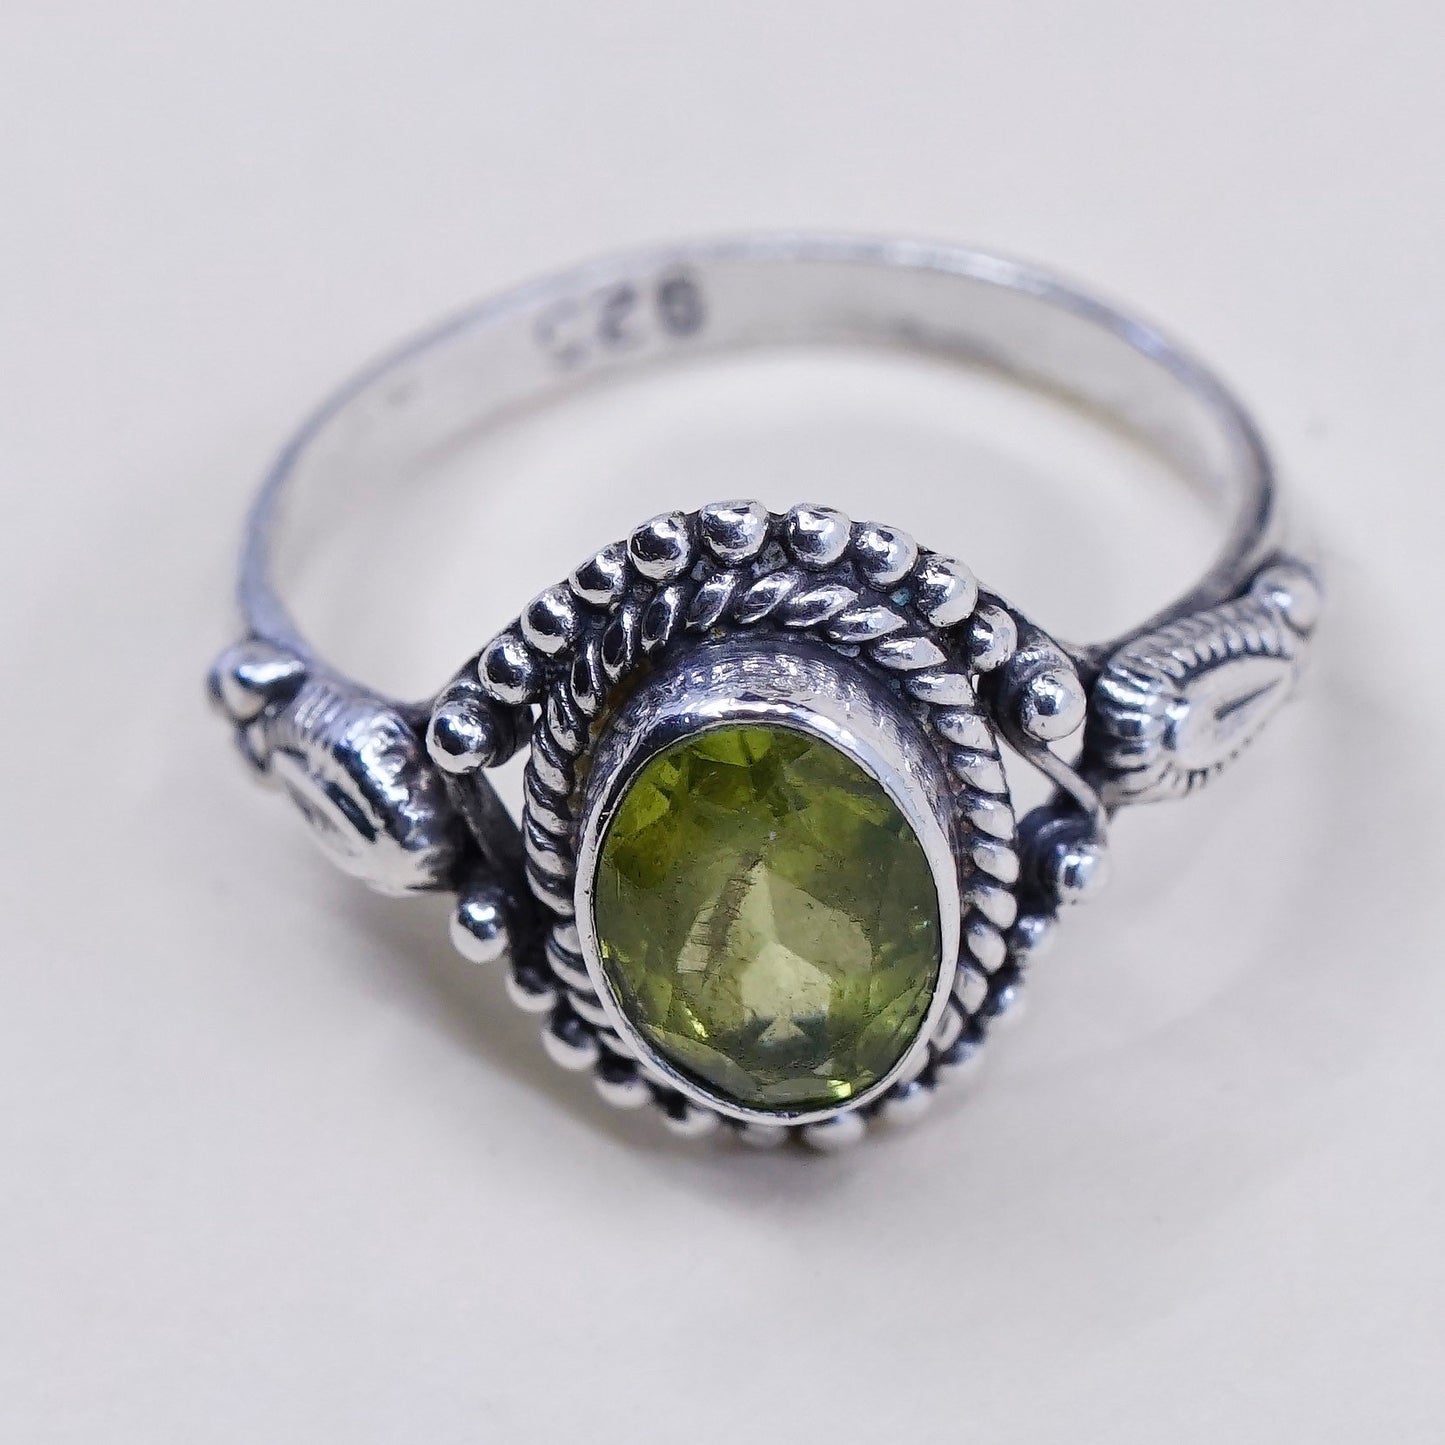 Size 6.5, Vintage sterling 925 silver handmade ring with peridot and beads